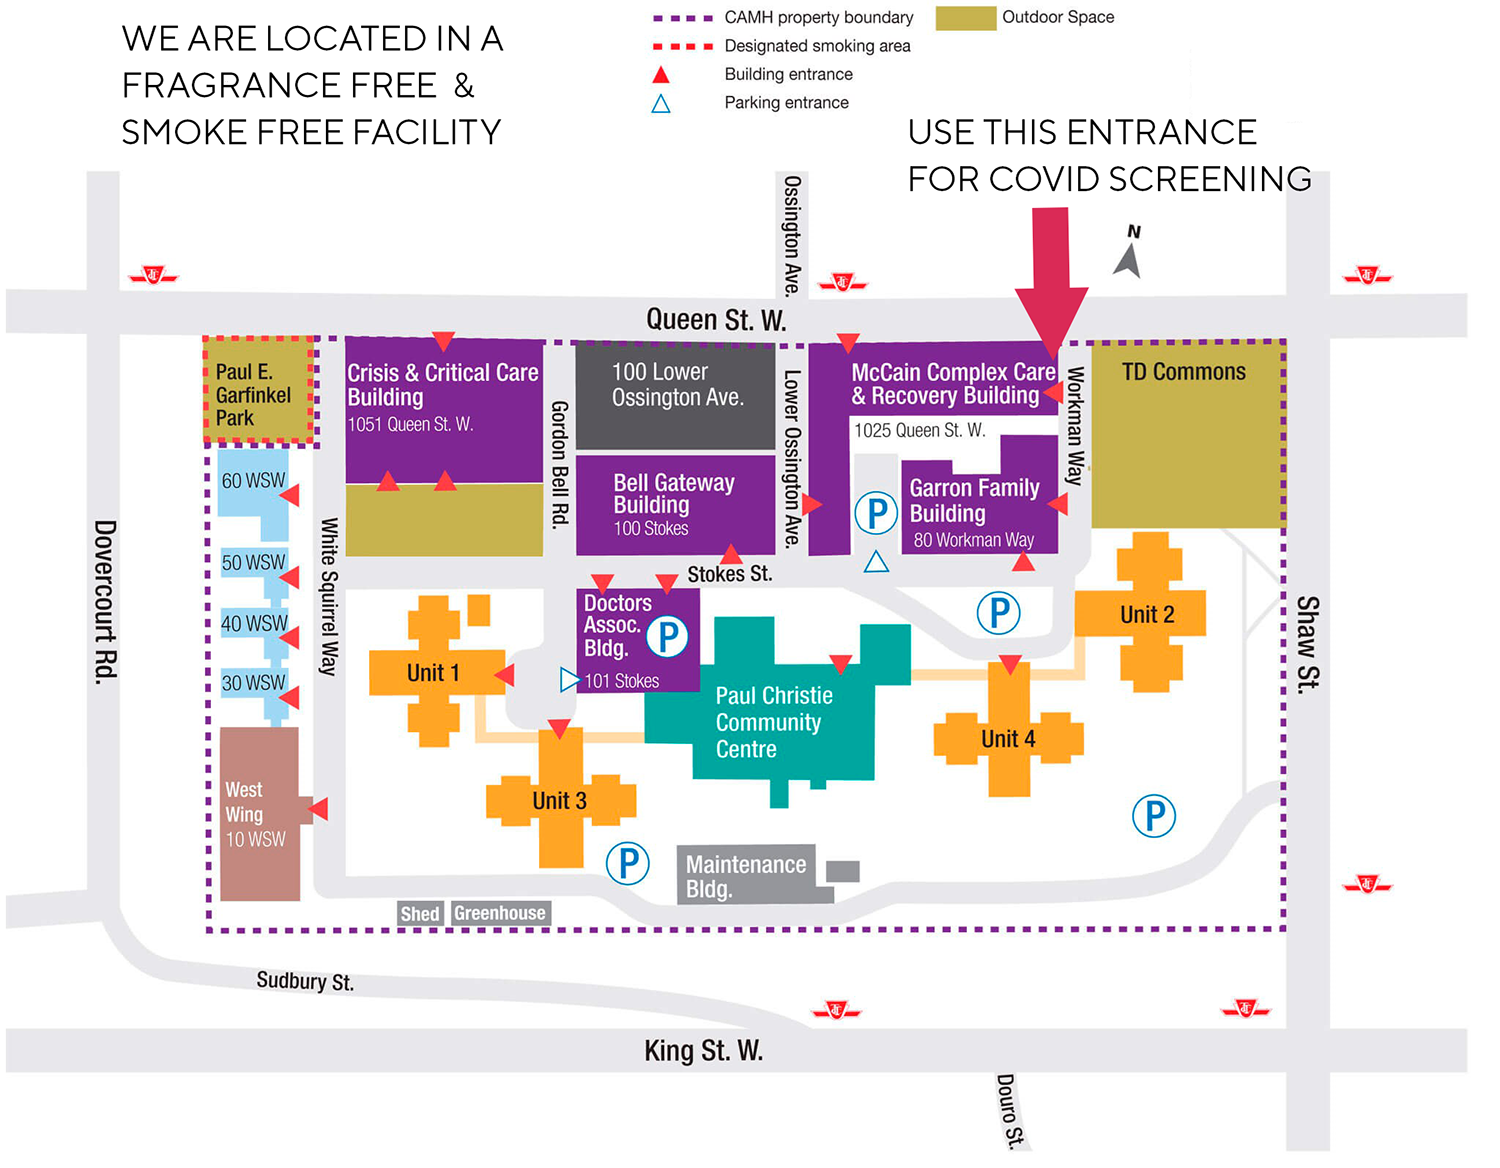 A map of the CAMH campus, where Workman Arts is located.